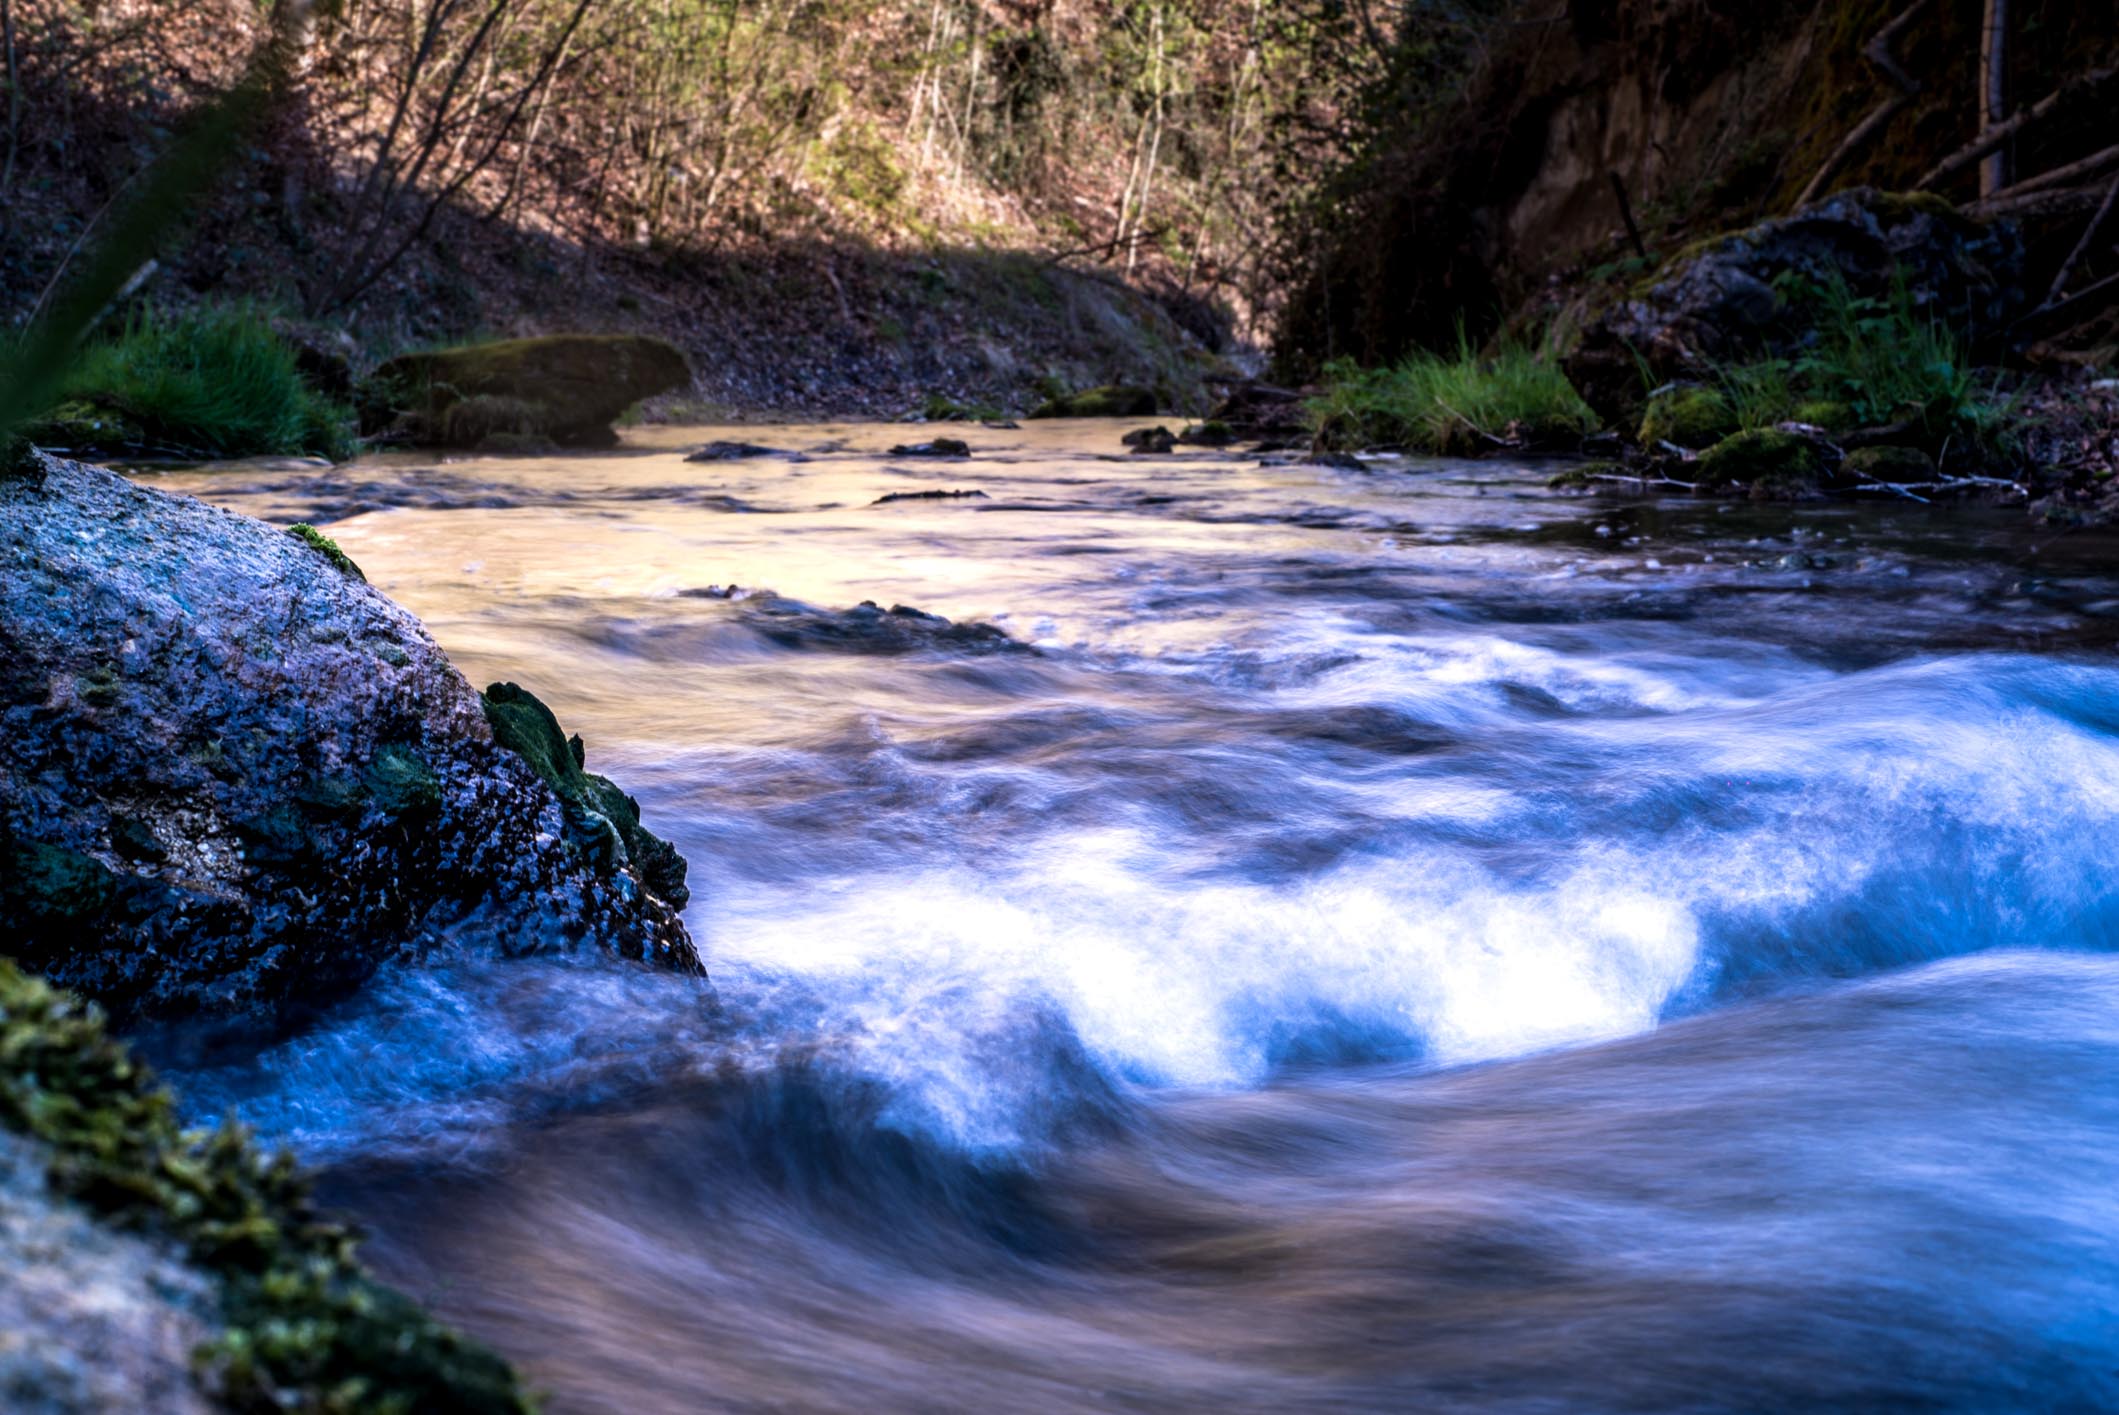 A .3 second exposure of the "Chräbsbach" in Zollikofen